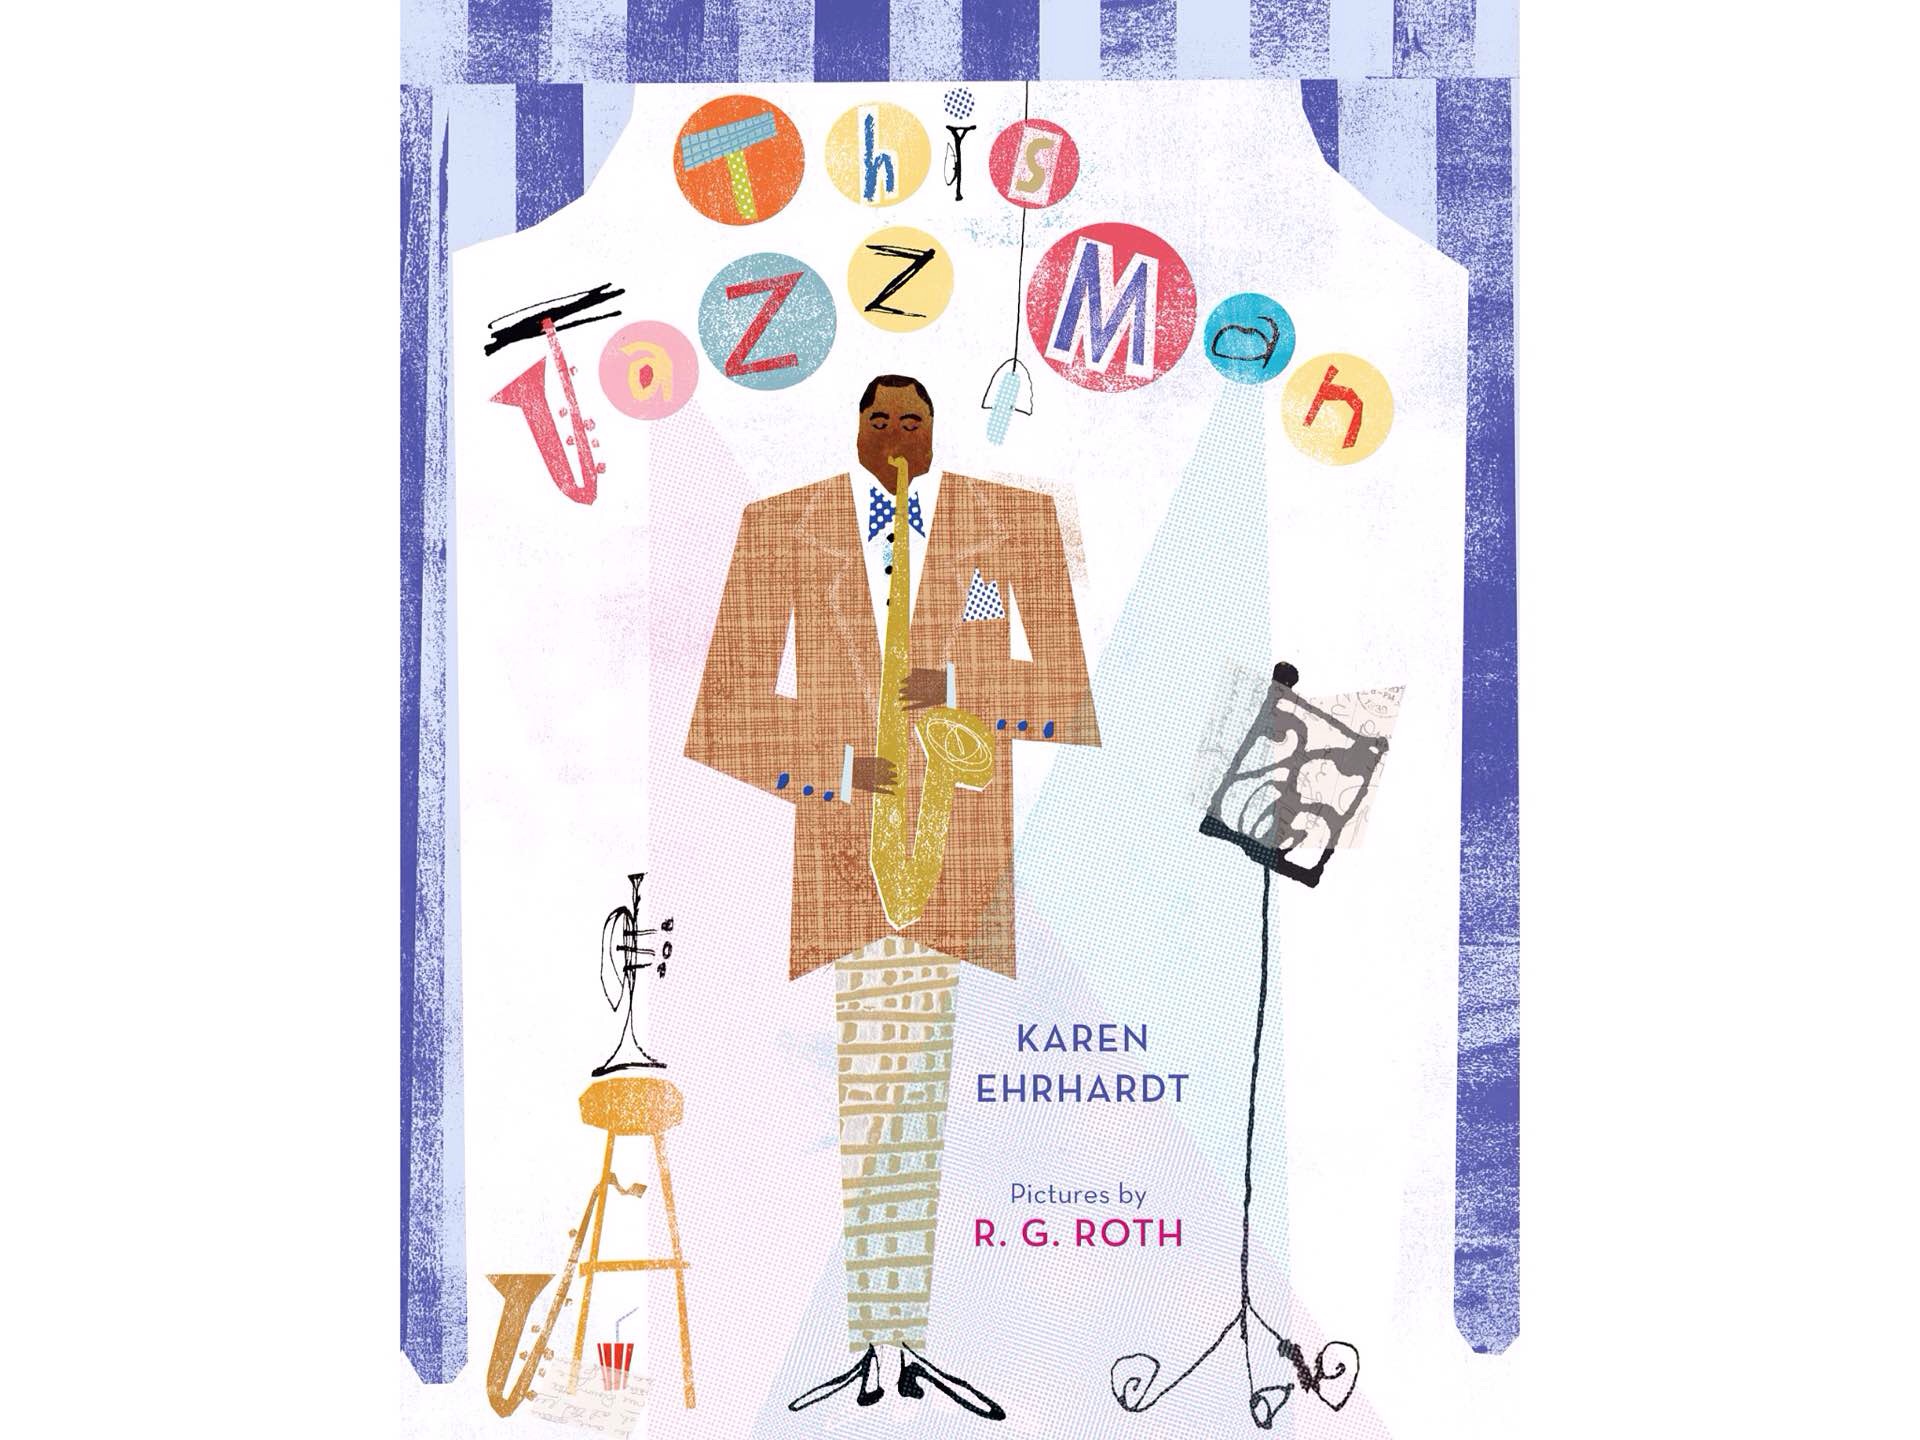 This Jazz Man by Karen Ehrhardt, illustrated by R.G. Roth.